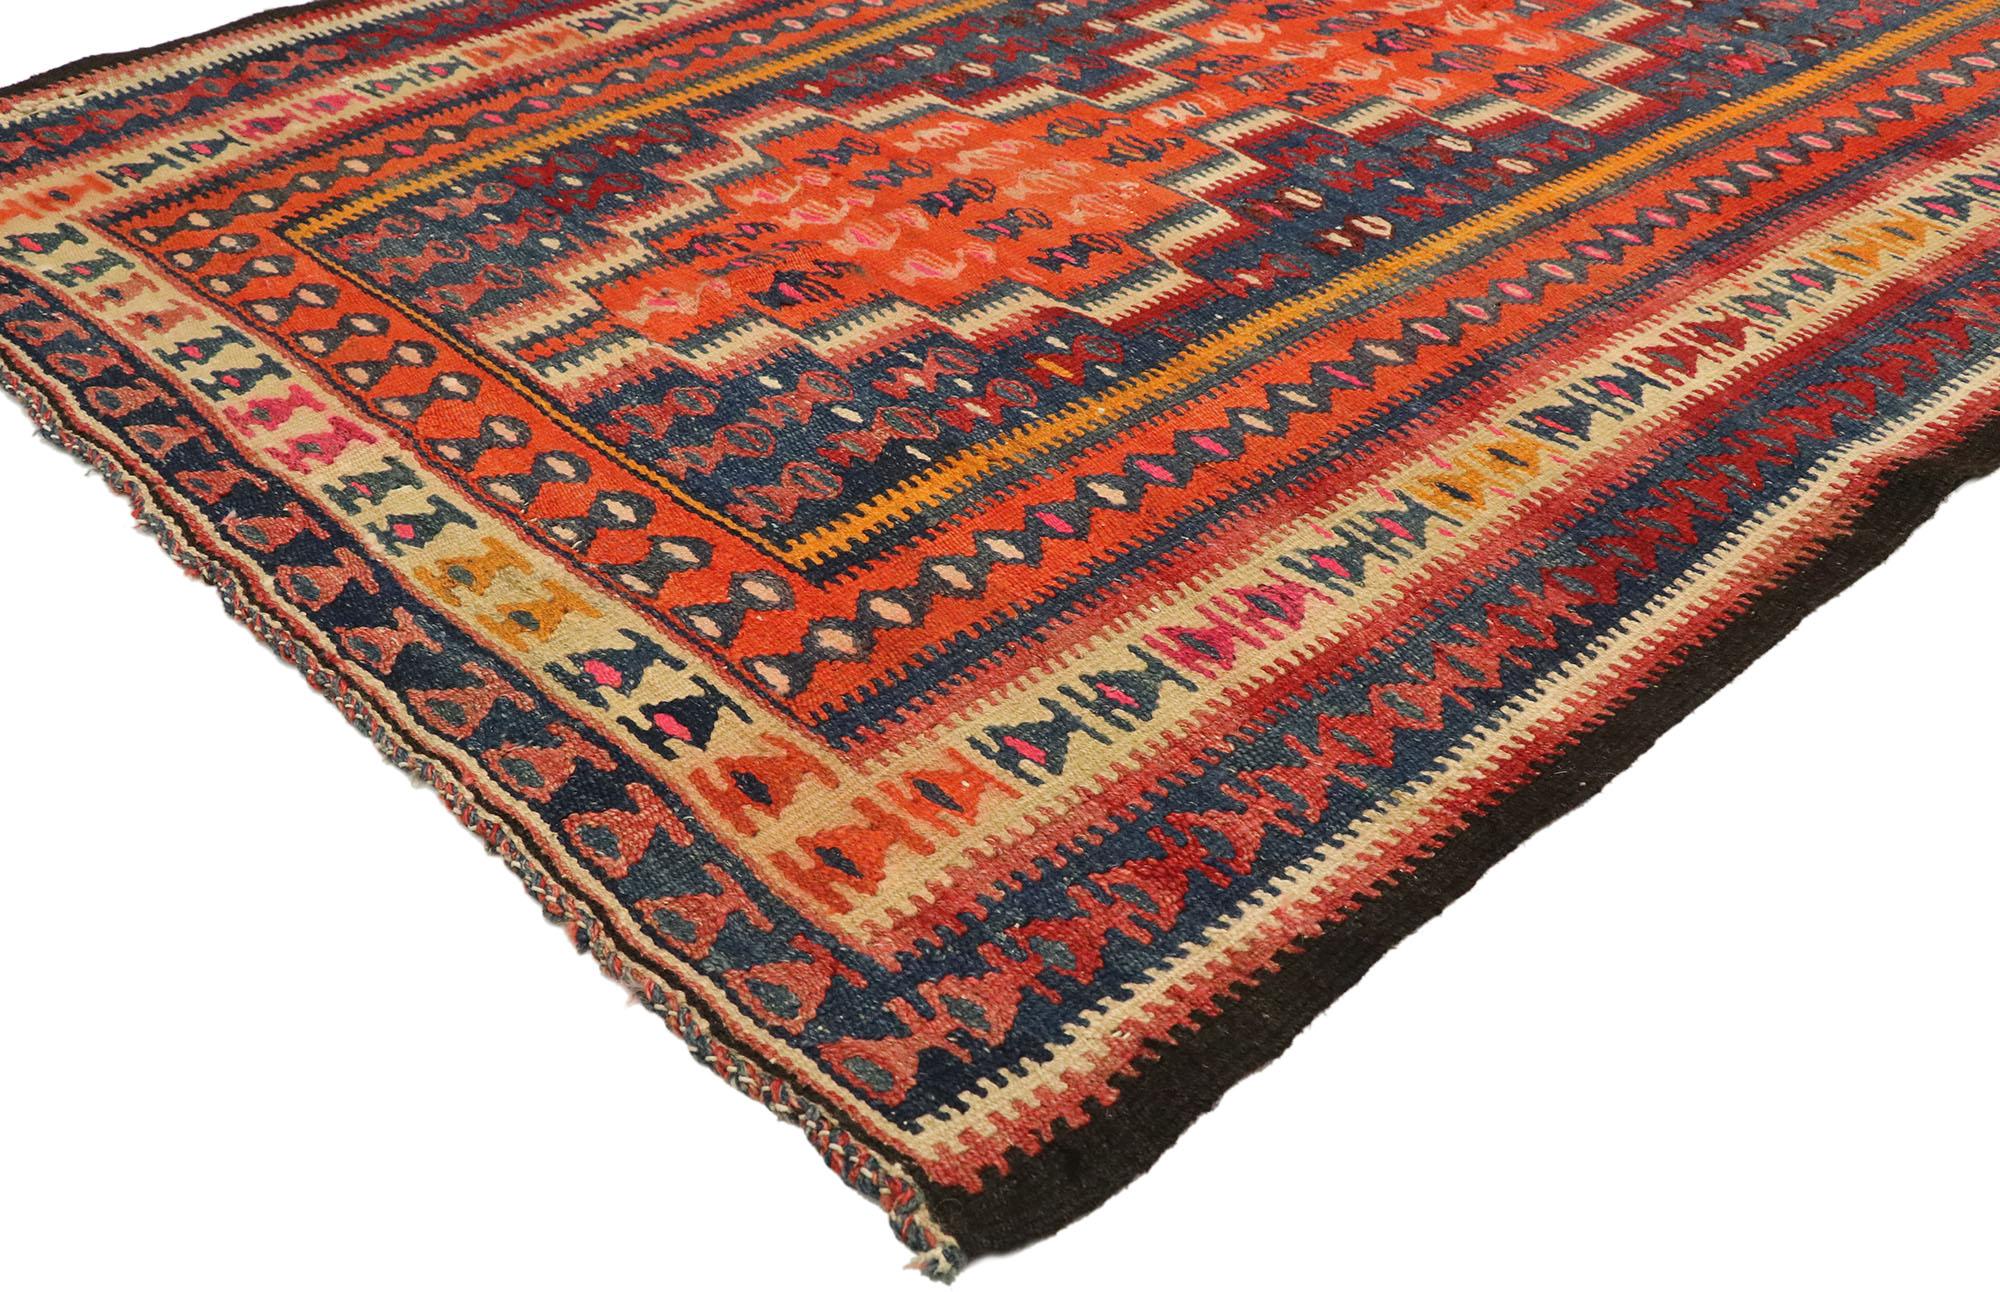 70468 Vintage Turkish Kilim Rug, 04'02 x 10'05. Turkish tribal kilim rugs are traditional, flat-woven textiles made by nomadic and semi-nomadic tribes in Turkey, characterized by their geometric patterns, bold colors, and symbolic motifs. Made